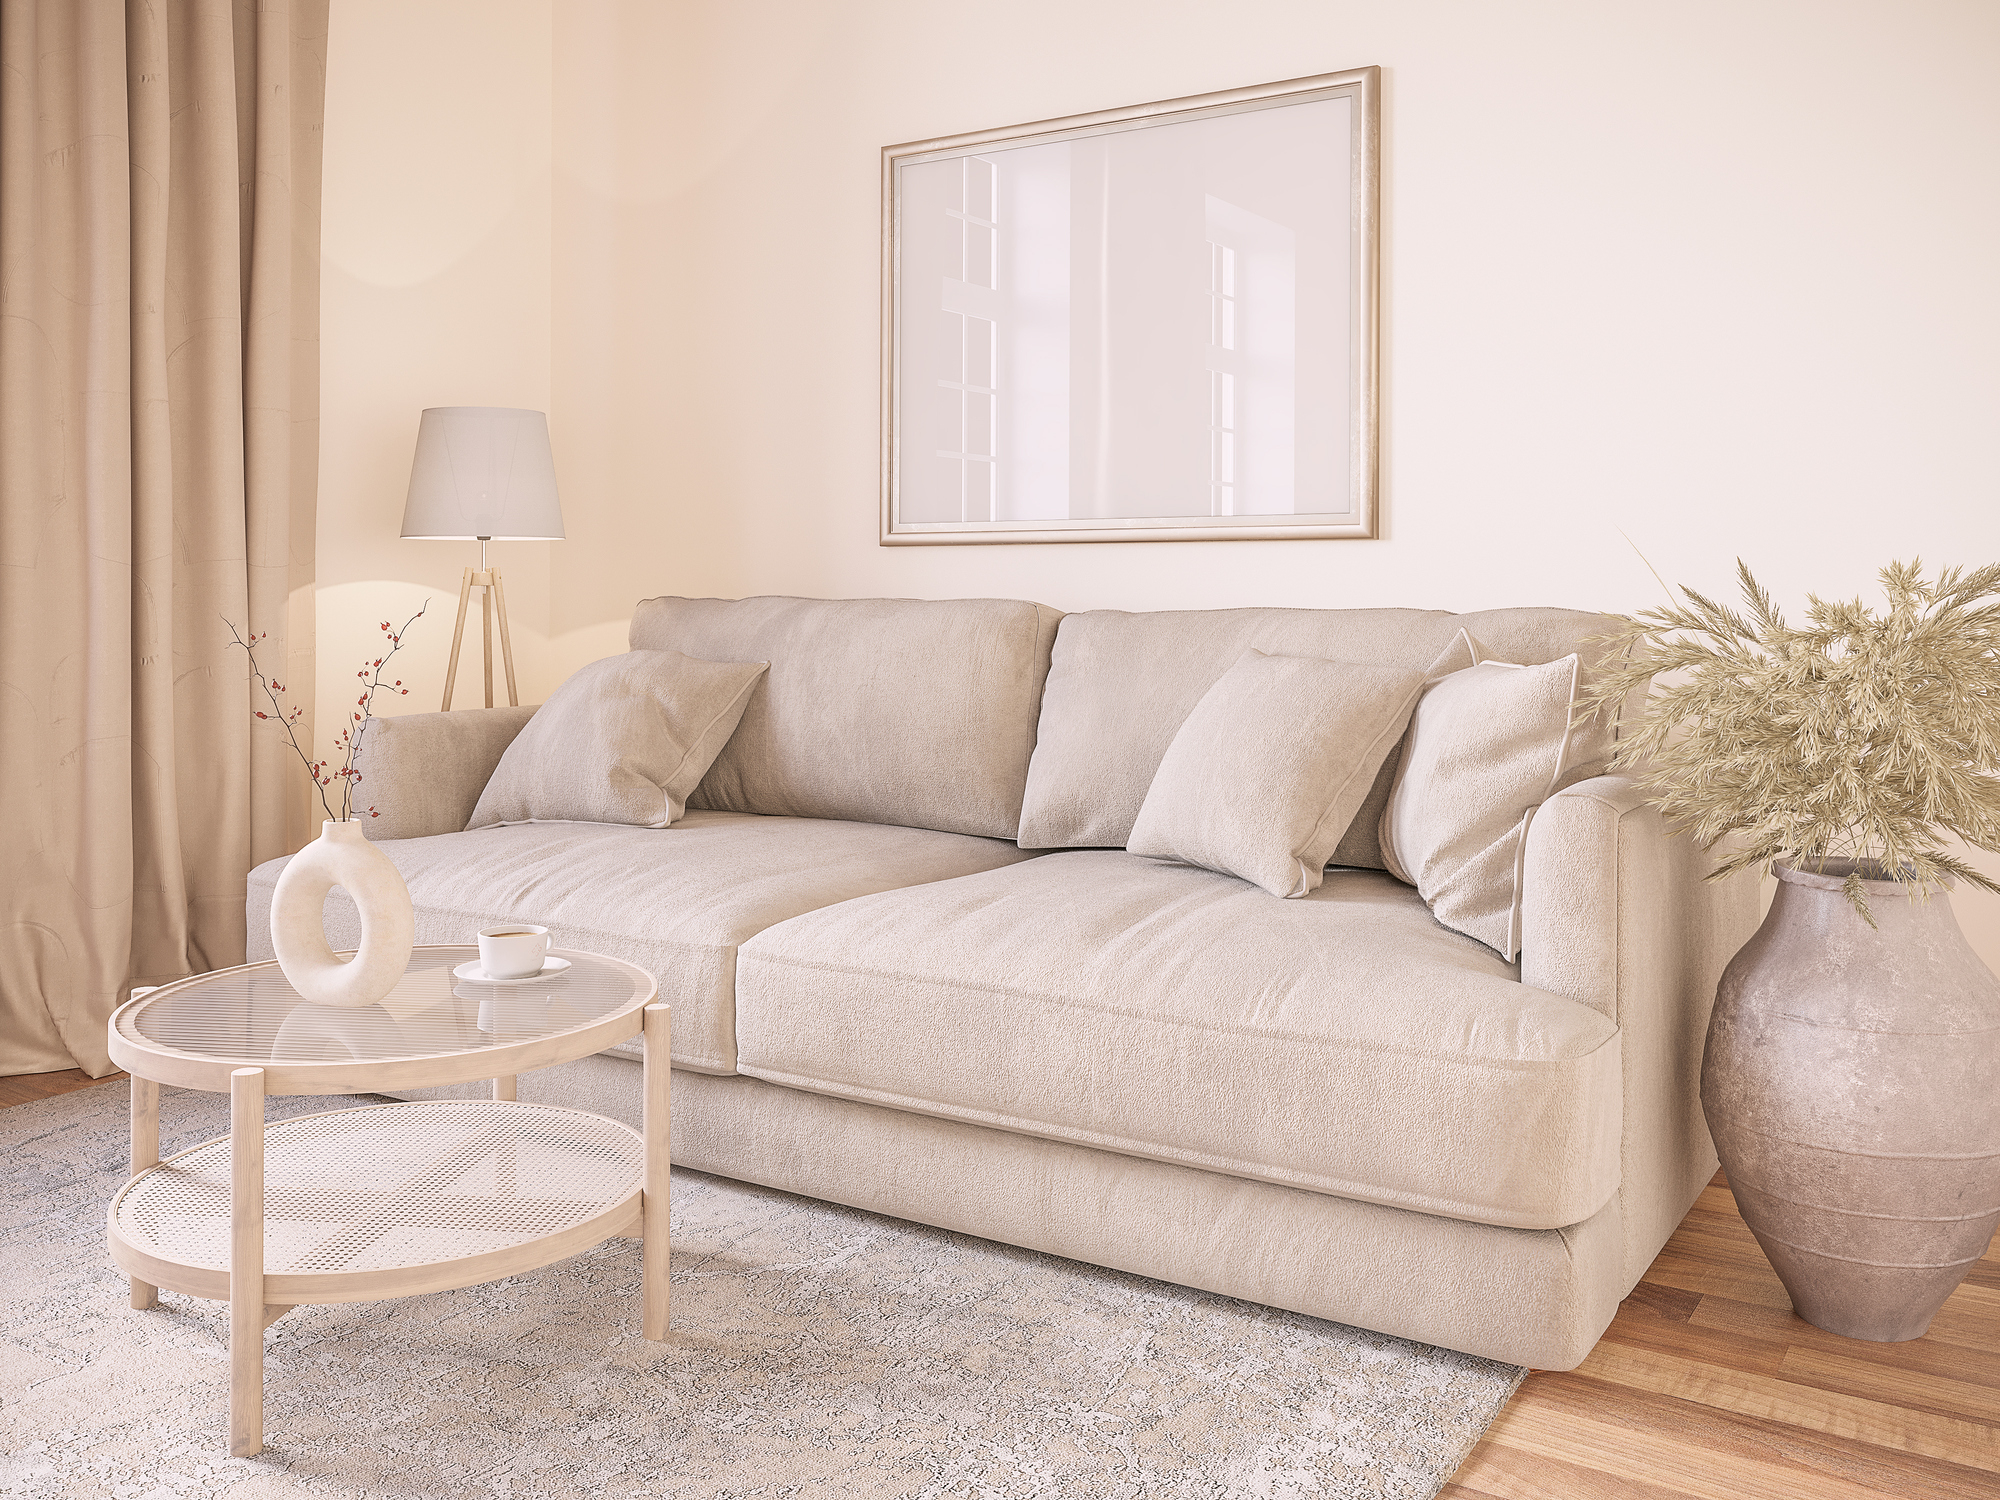 Neutral-toned living room with a plush sofa, round coffee table, and decorative vases